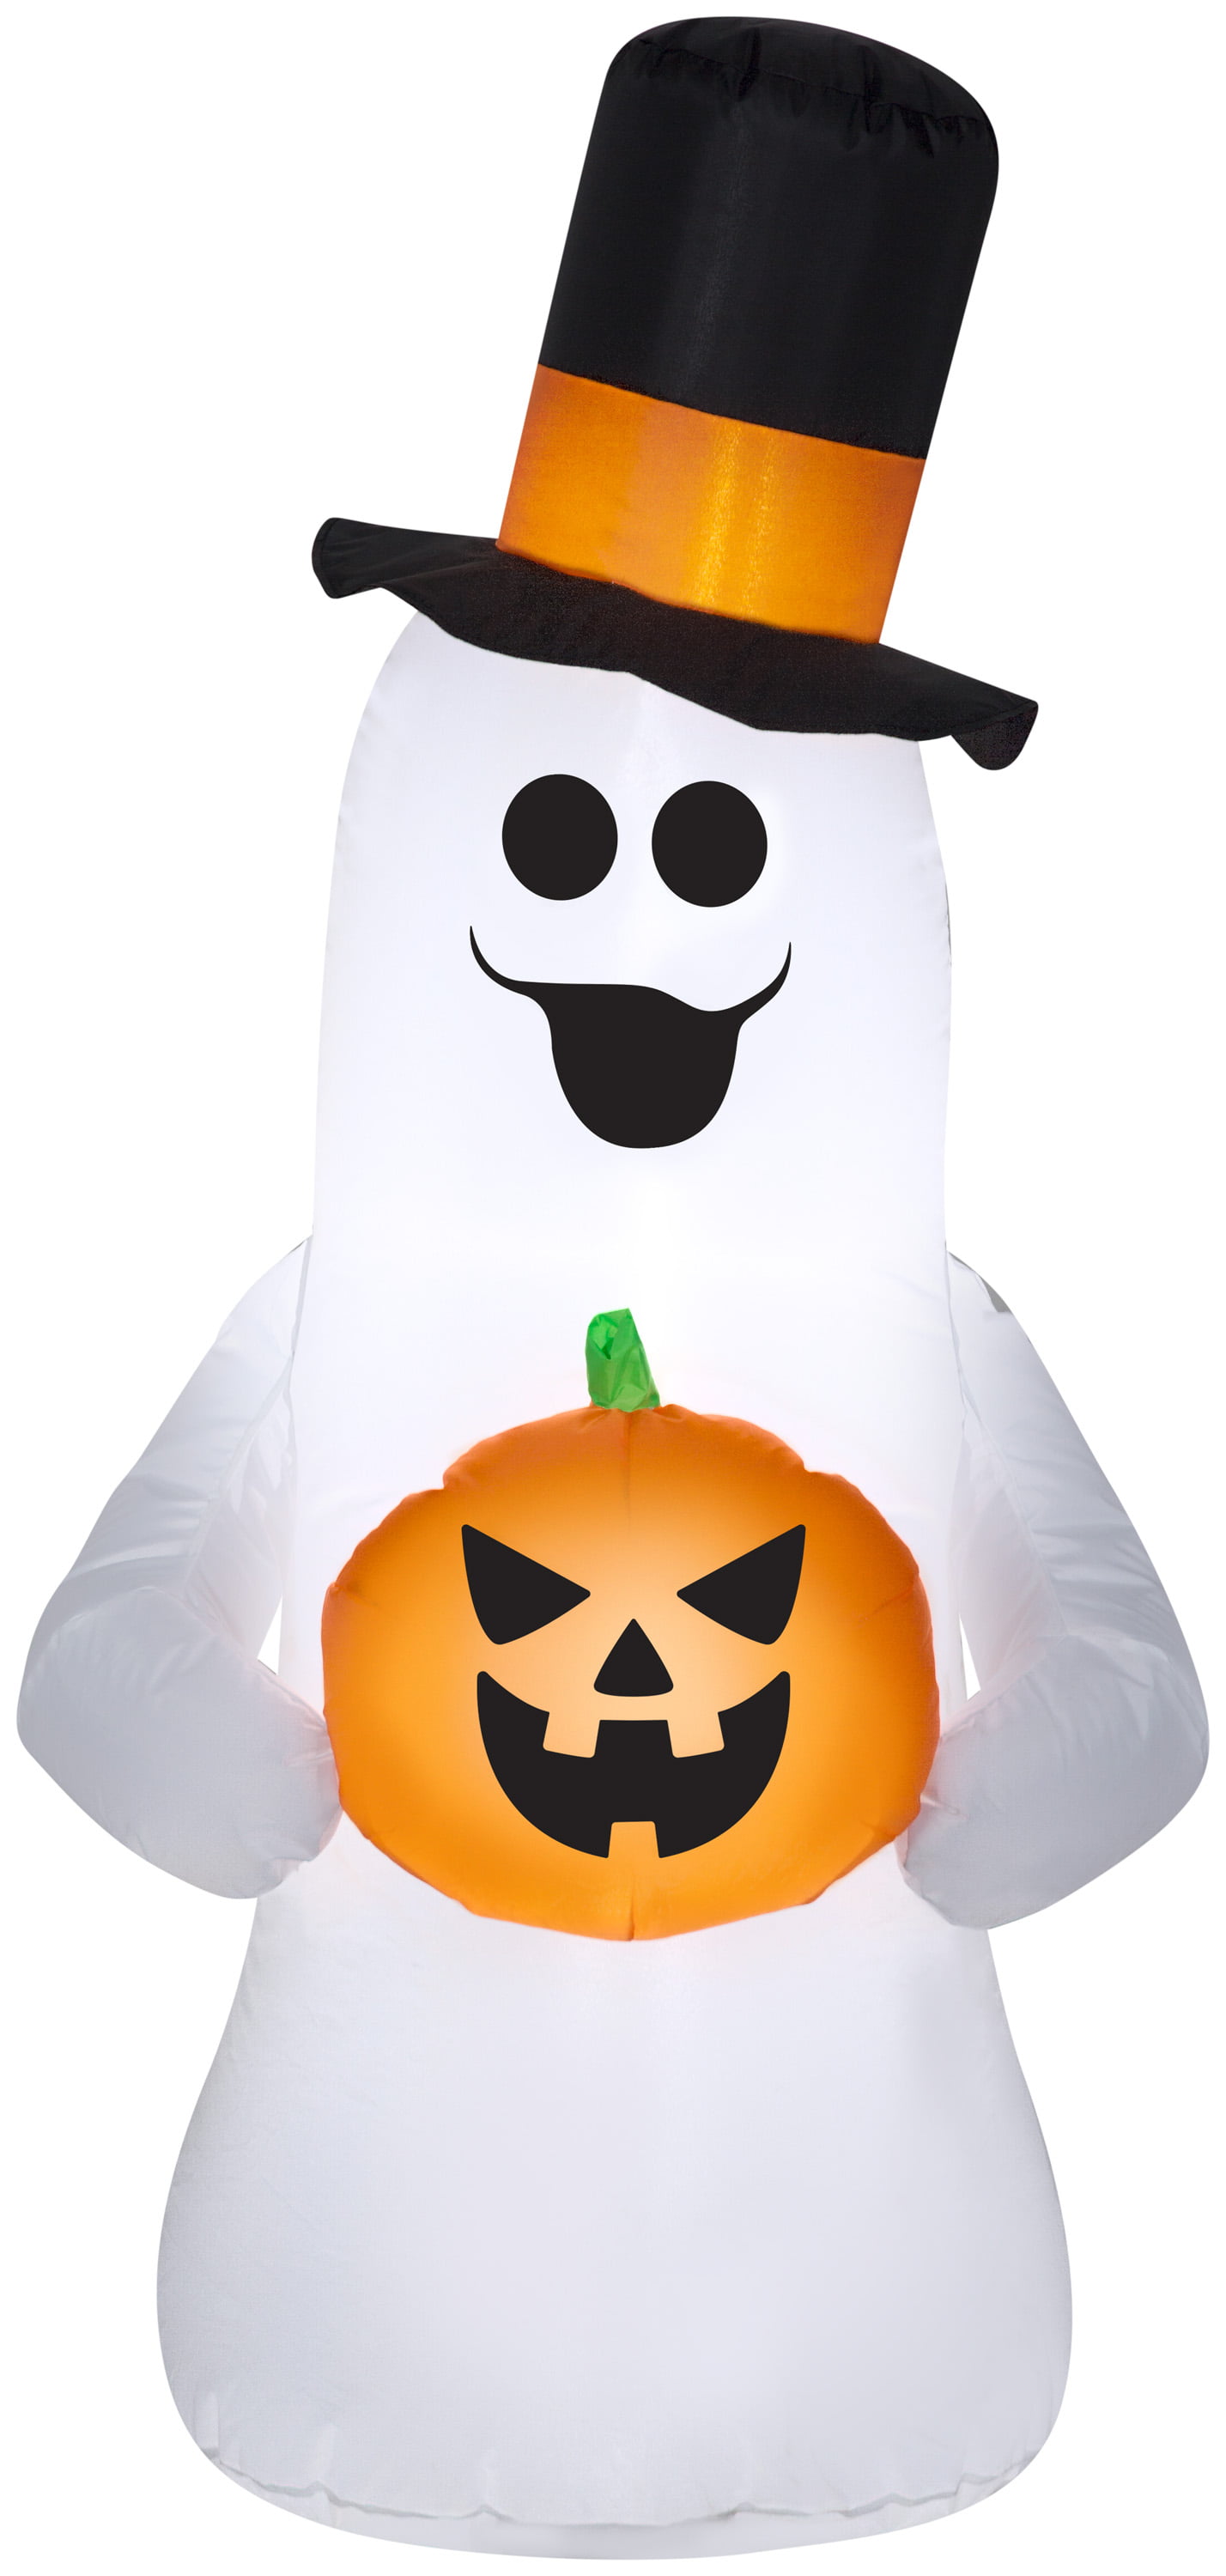 Gemmy Outdoor Inflatable White Ghost with Witch hat Bundled with Gemmy Skeleton with a Pumpkin Head MCMGoods